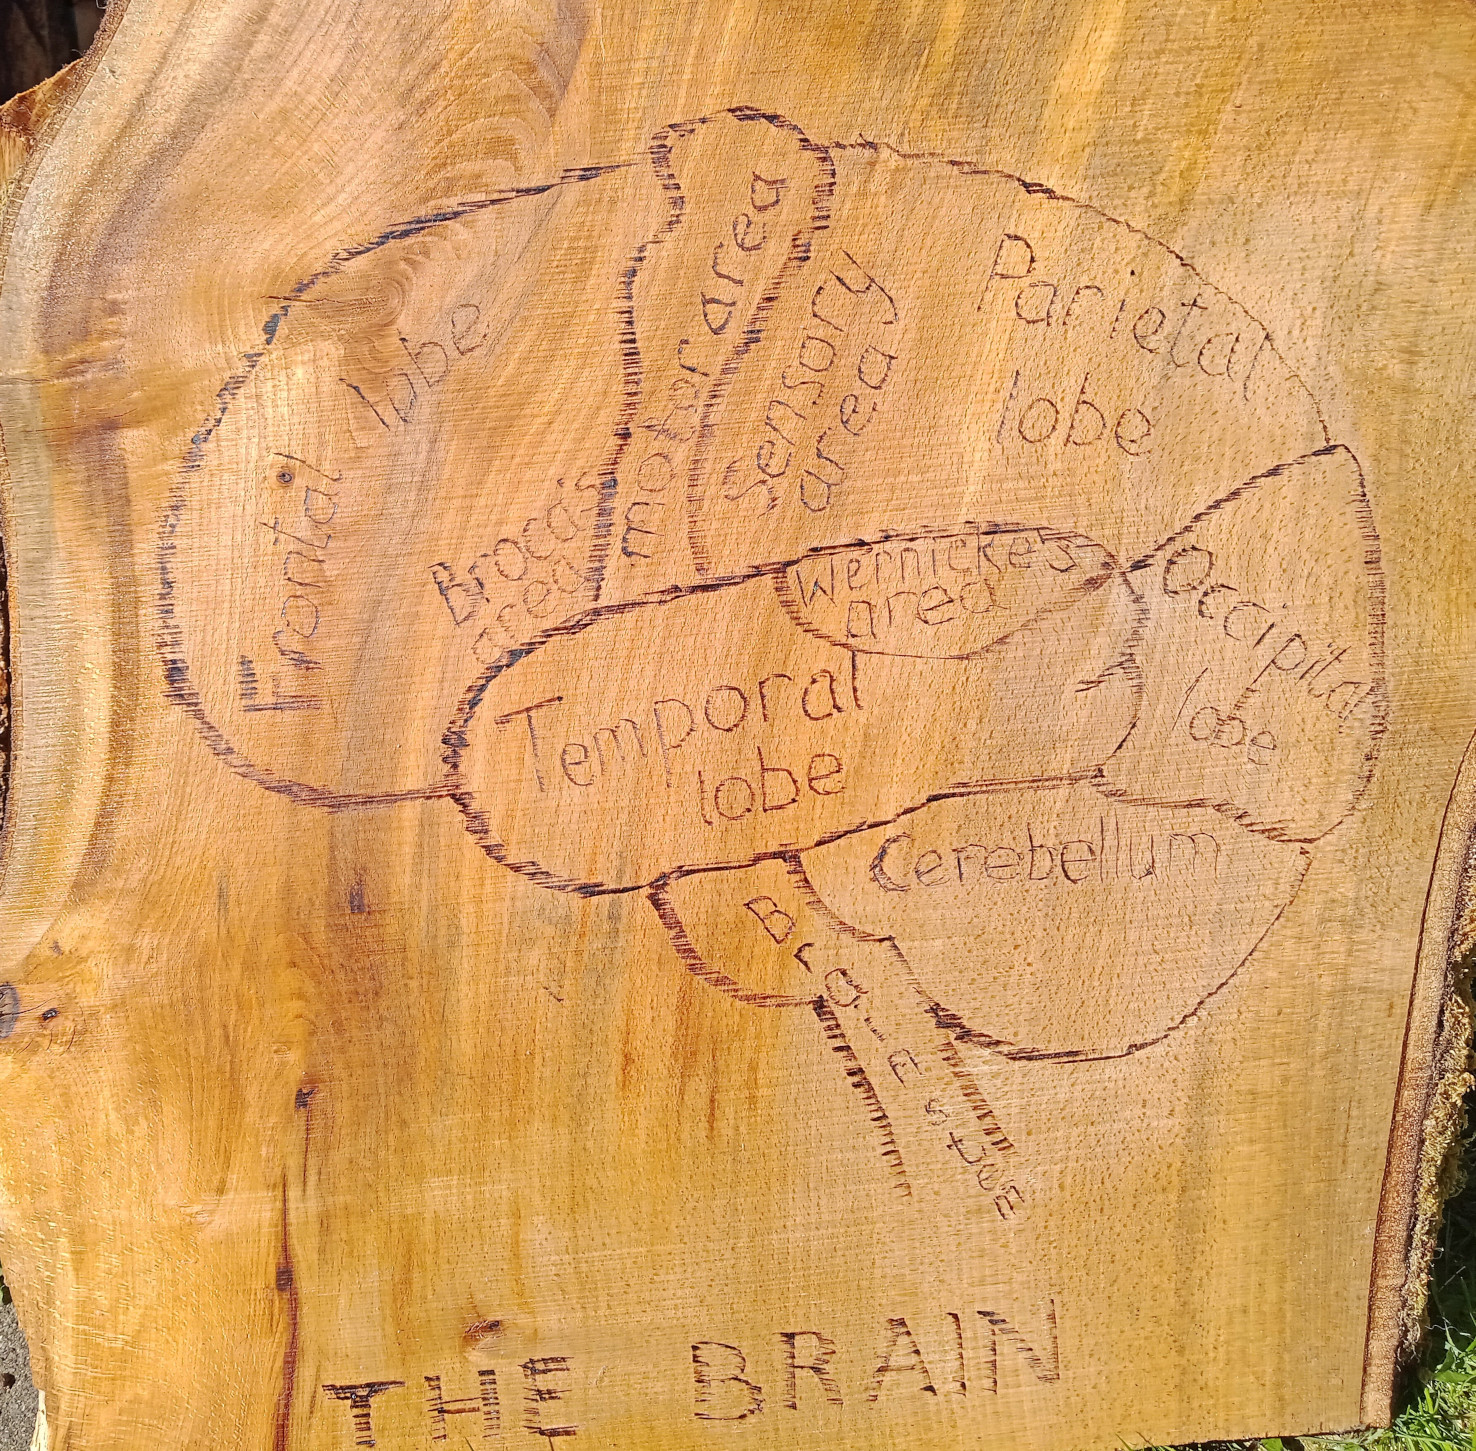 Pyrography Anatomical Diagram of the Brain coated in tung oil